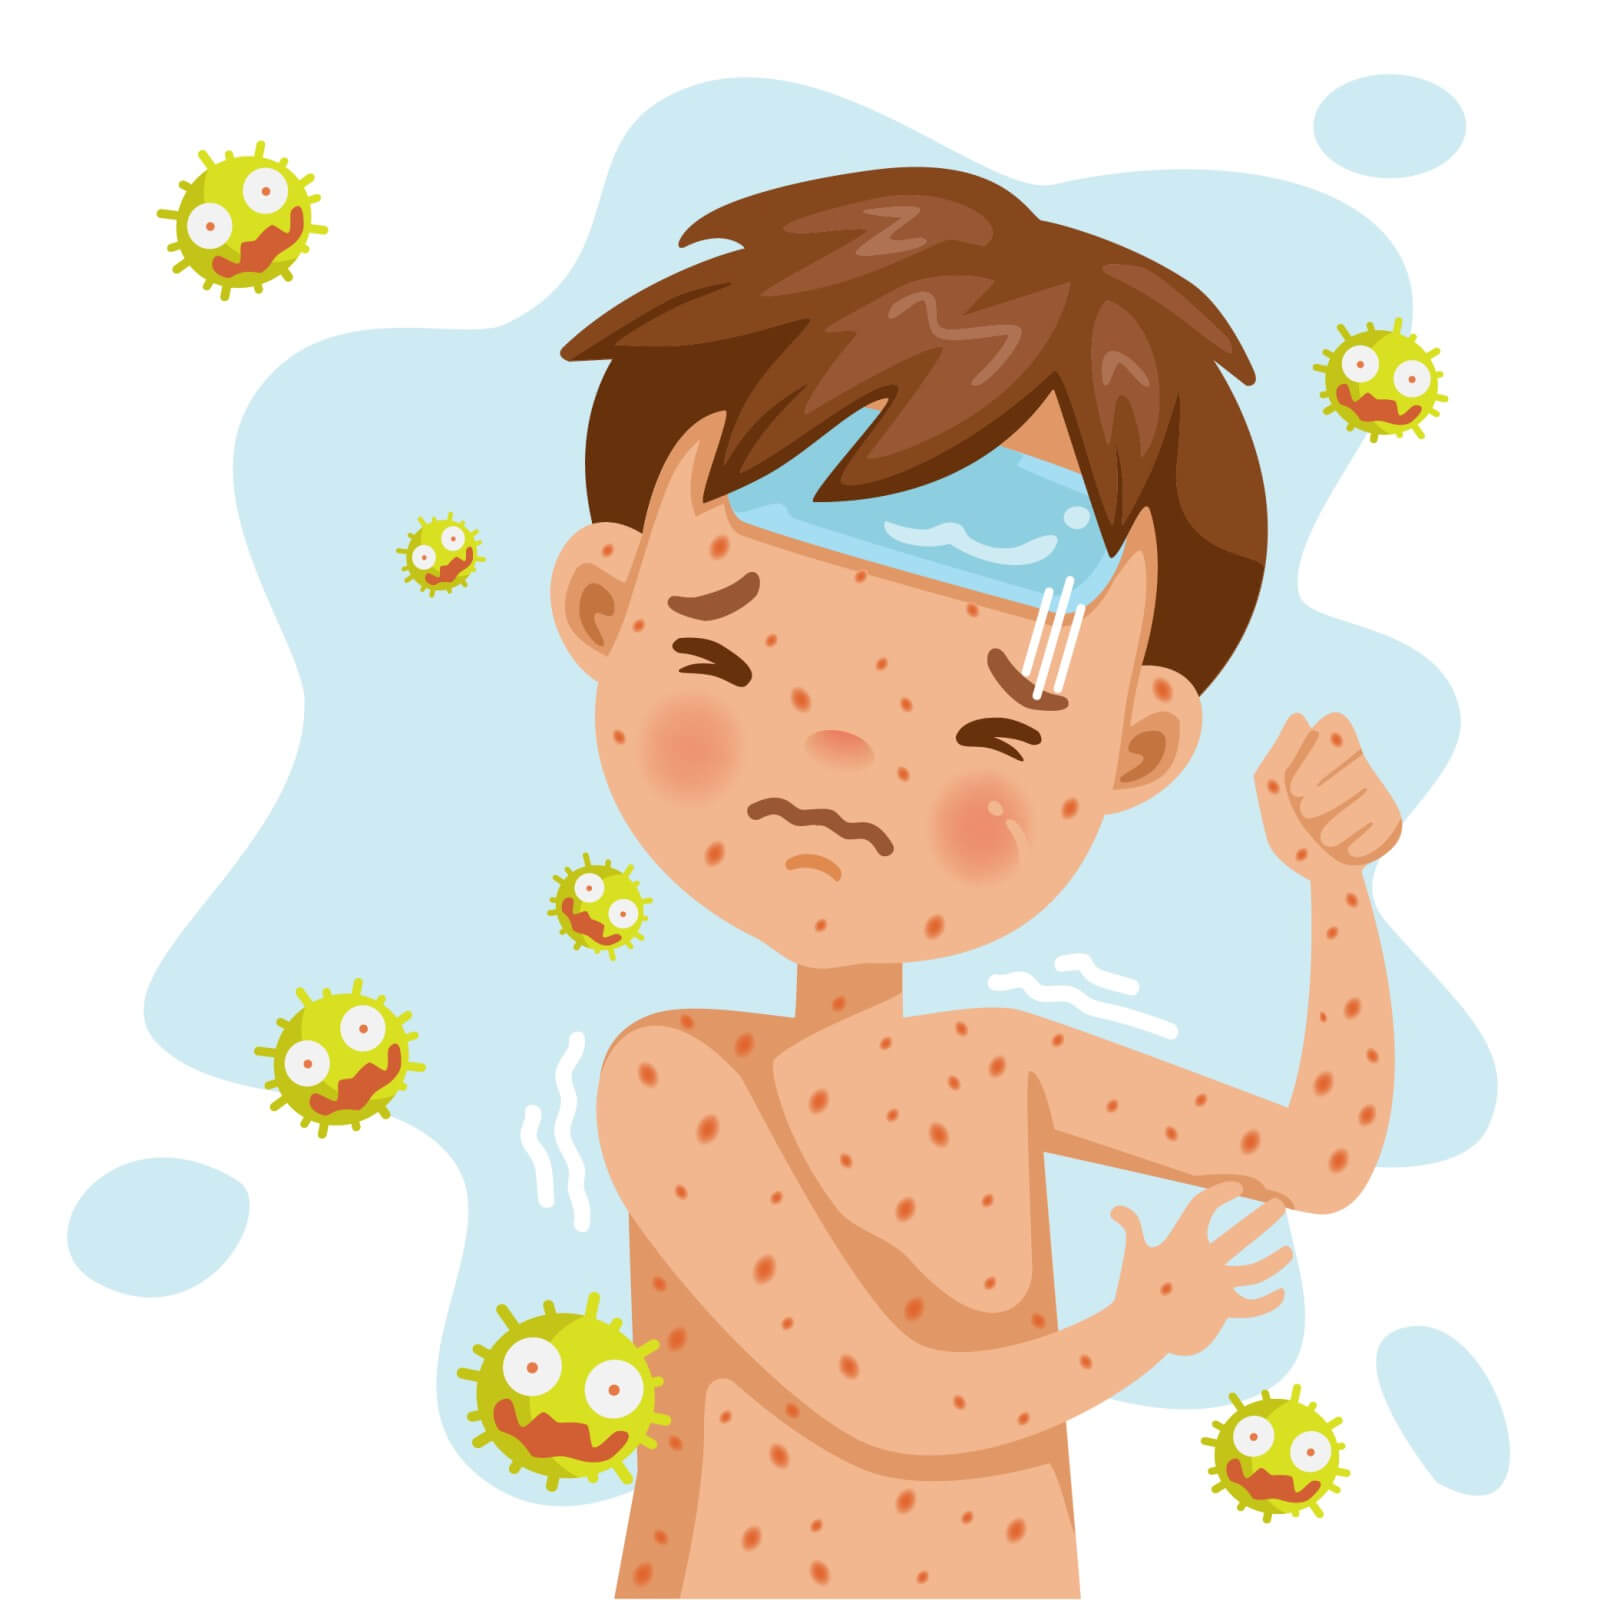 Chickenpox What You Need to Know